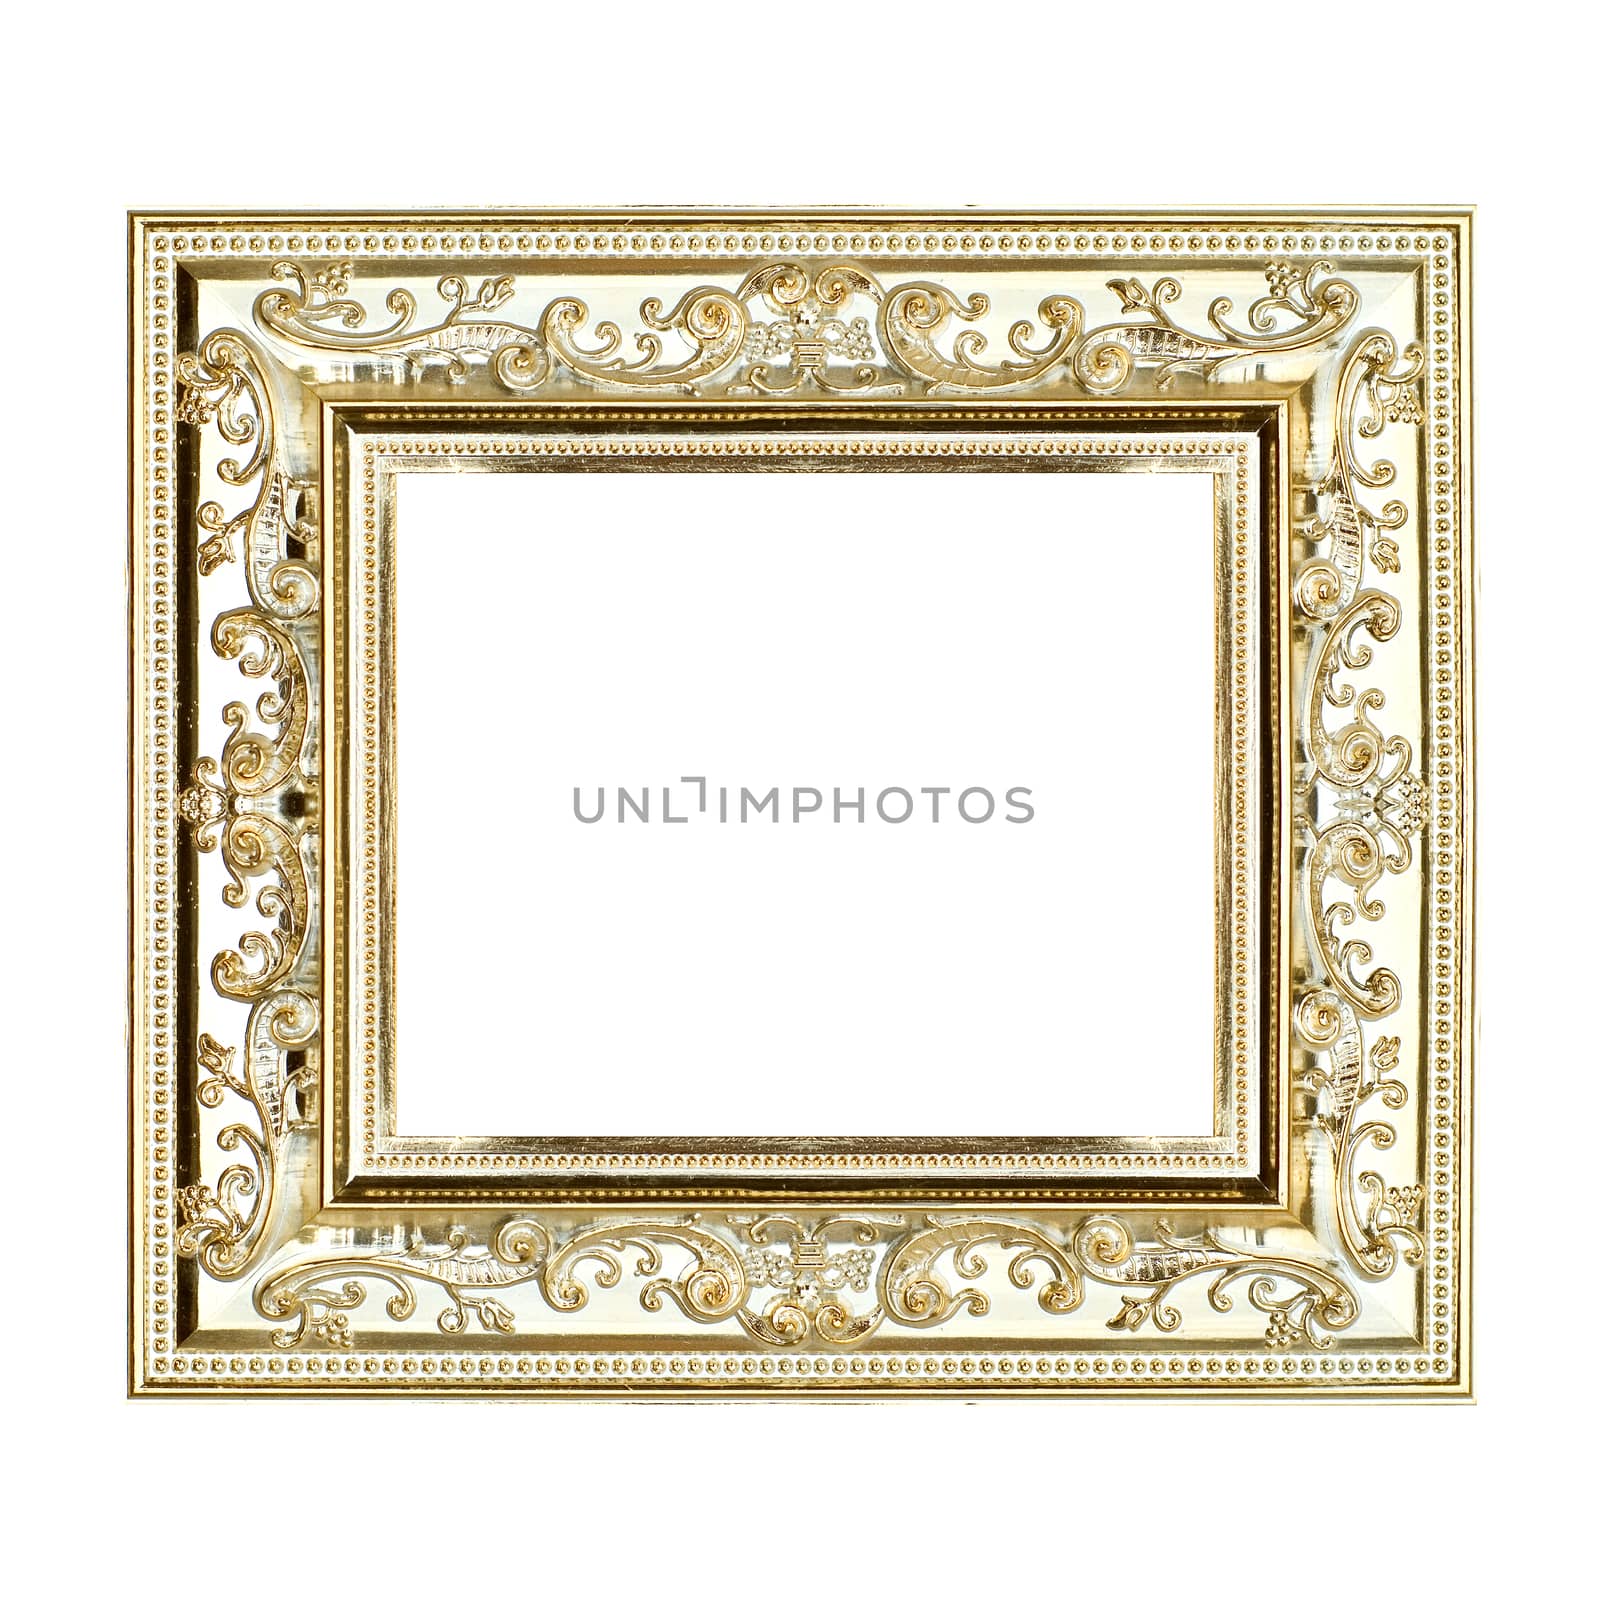 gilt frame, decorated with kitschy, shiny and empty